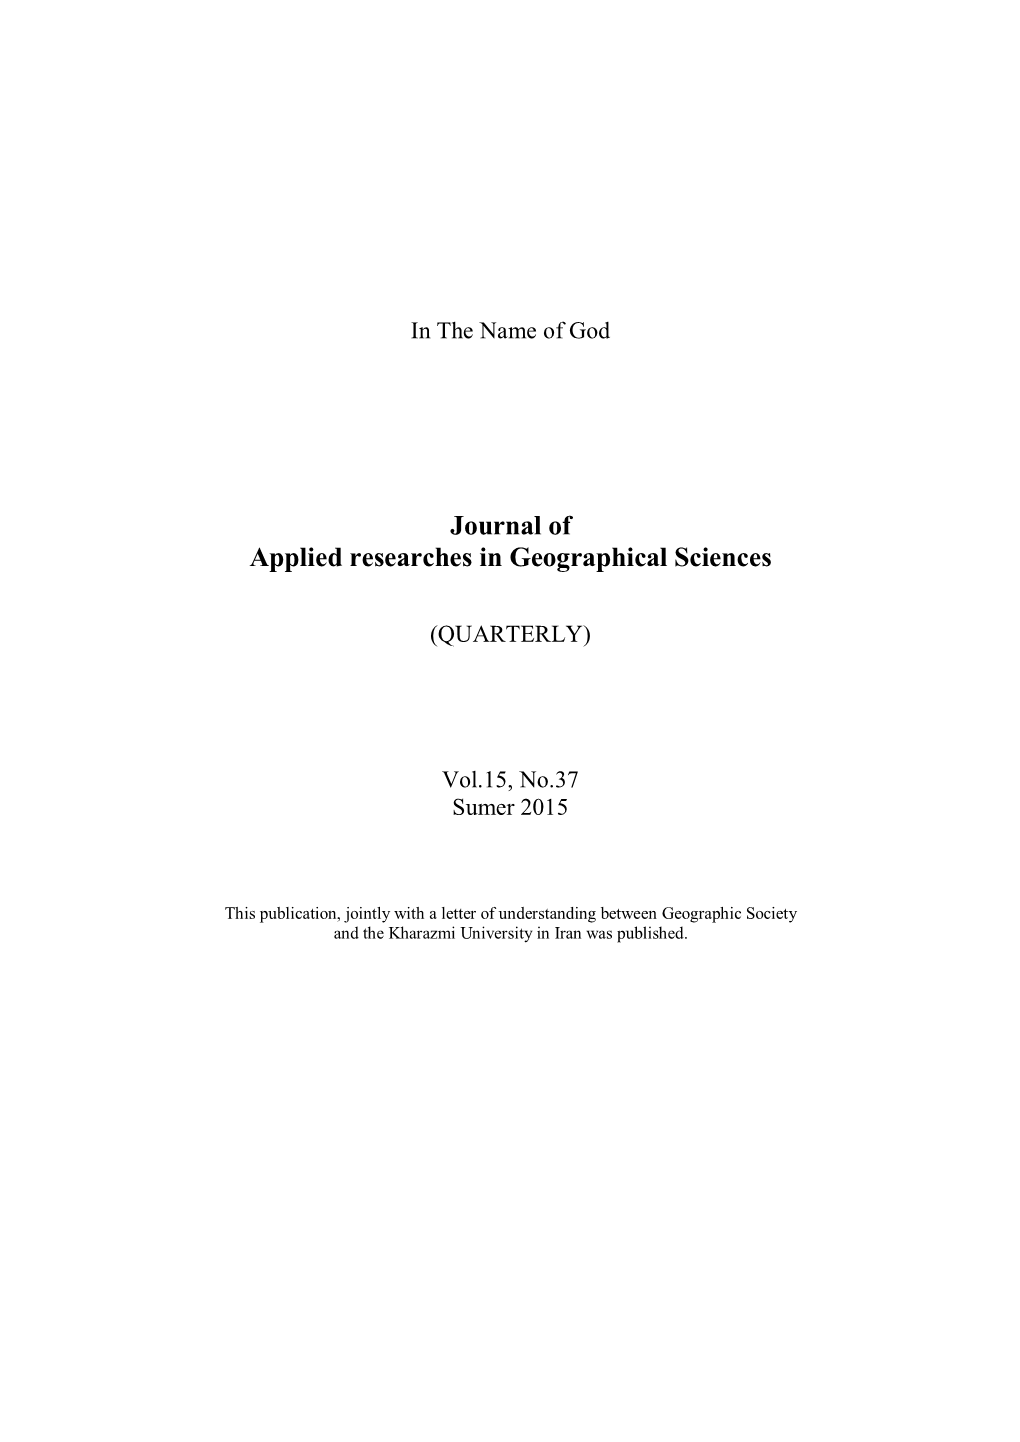 Journal of Applied Researches in Geographical Sciences